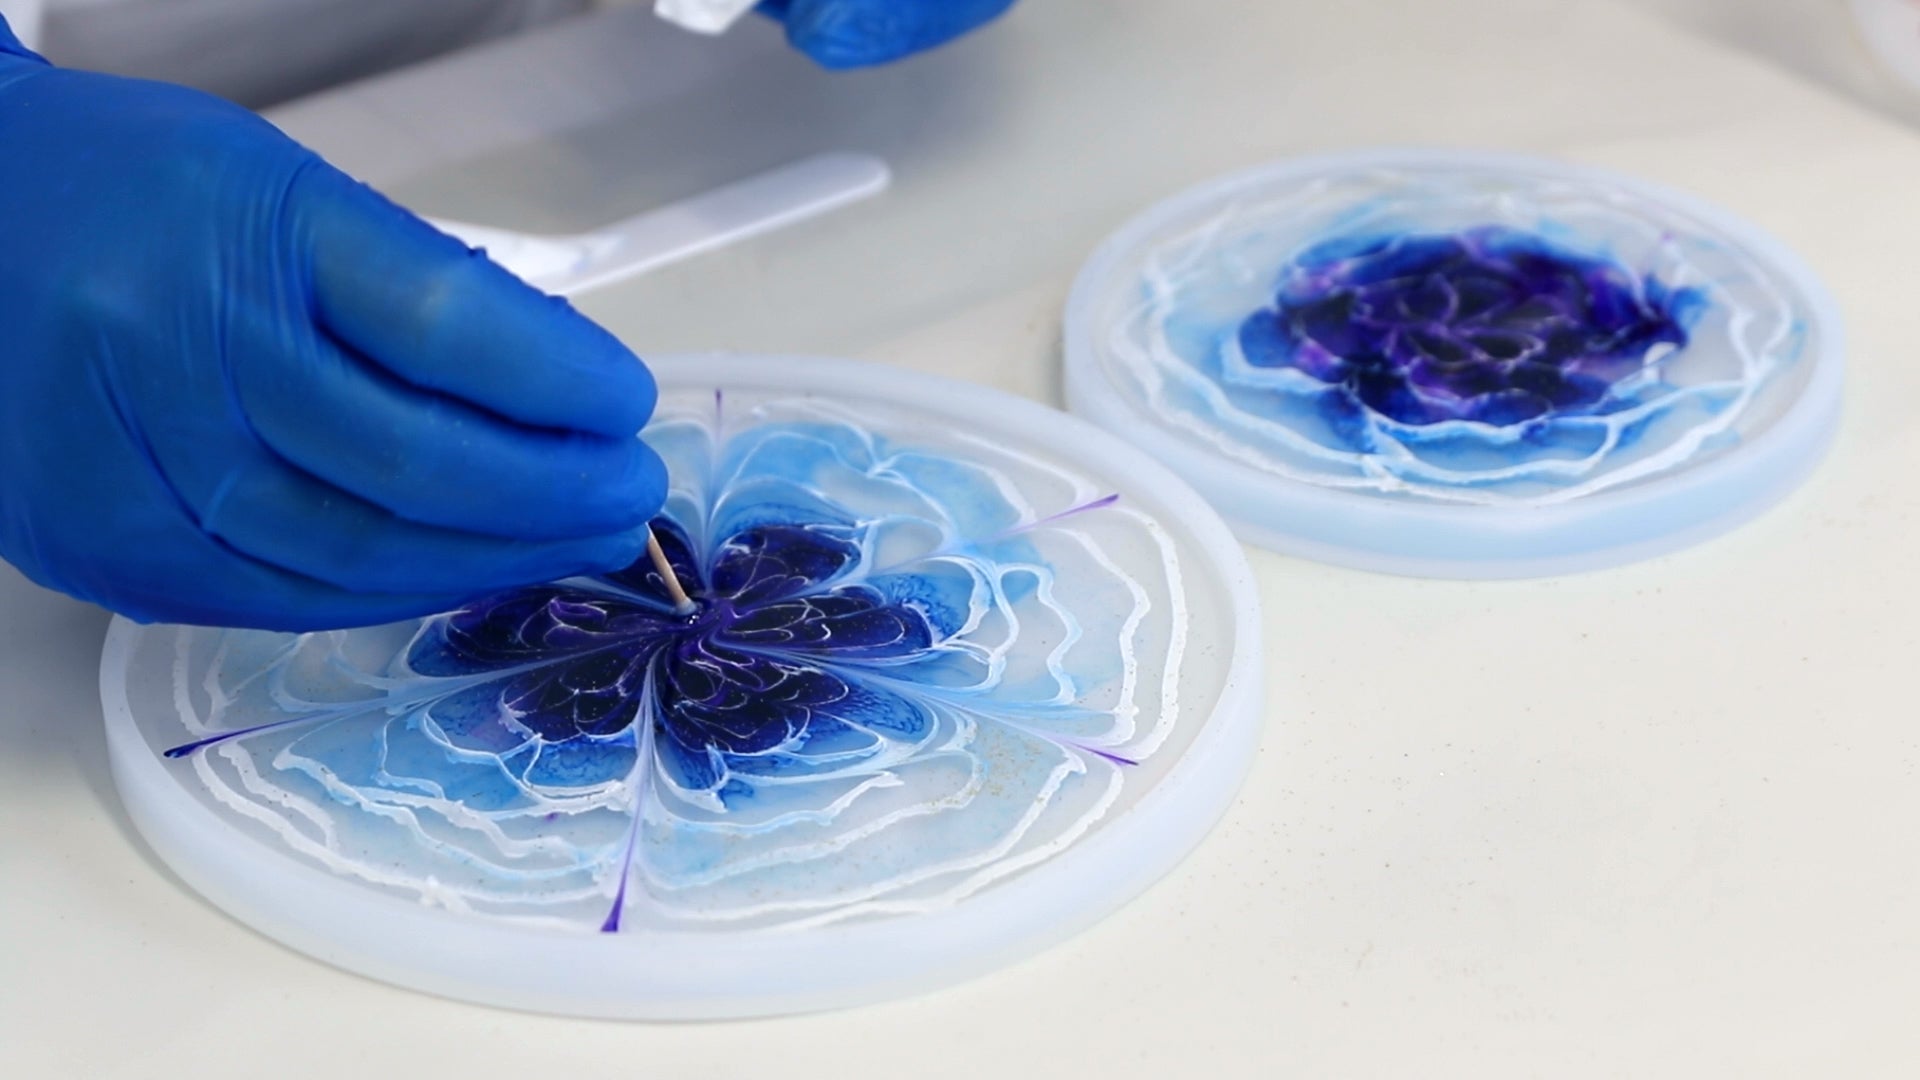 shape the flower petal in resin 3D flower by dragging toothpick through the resin